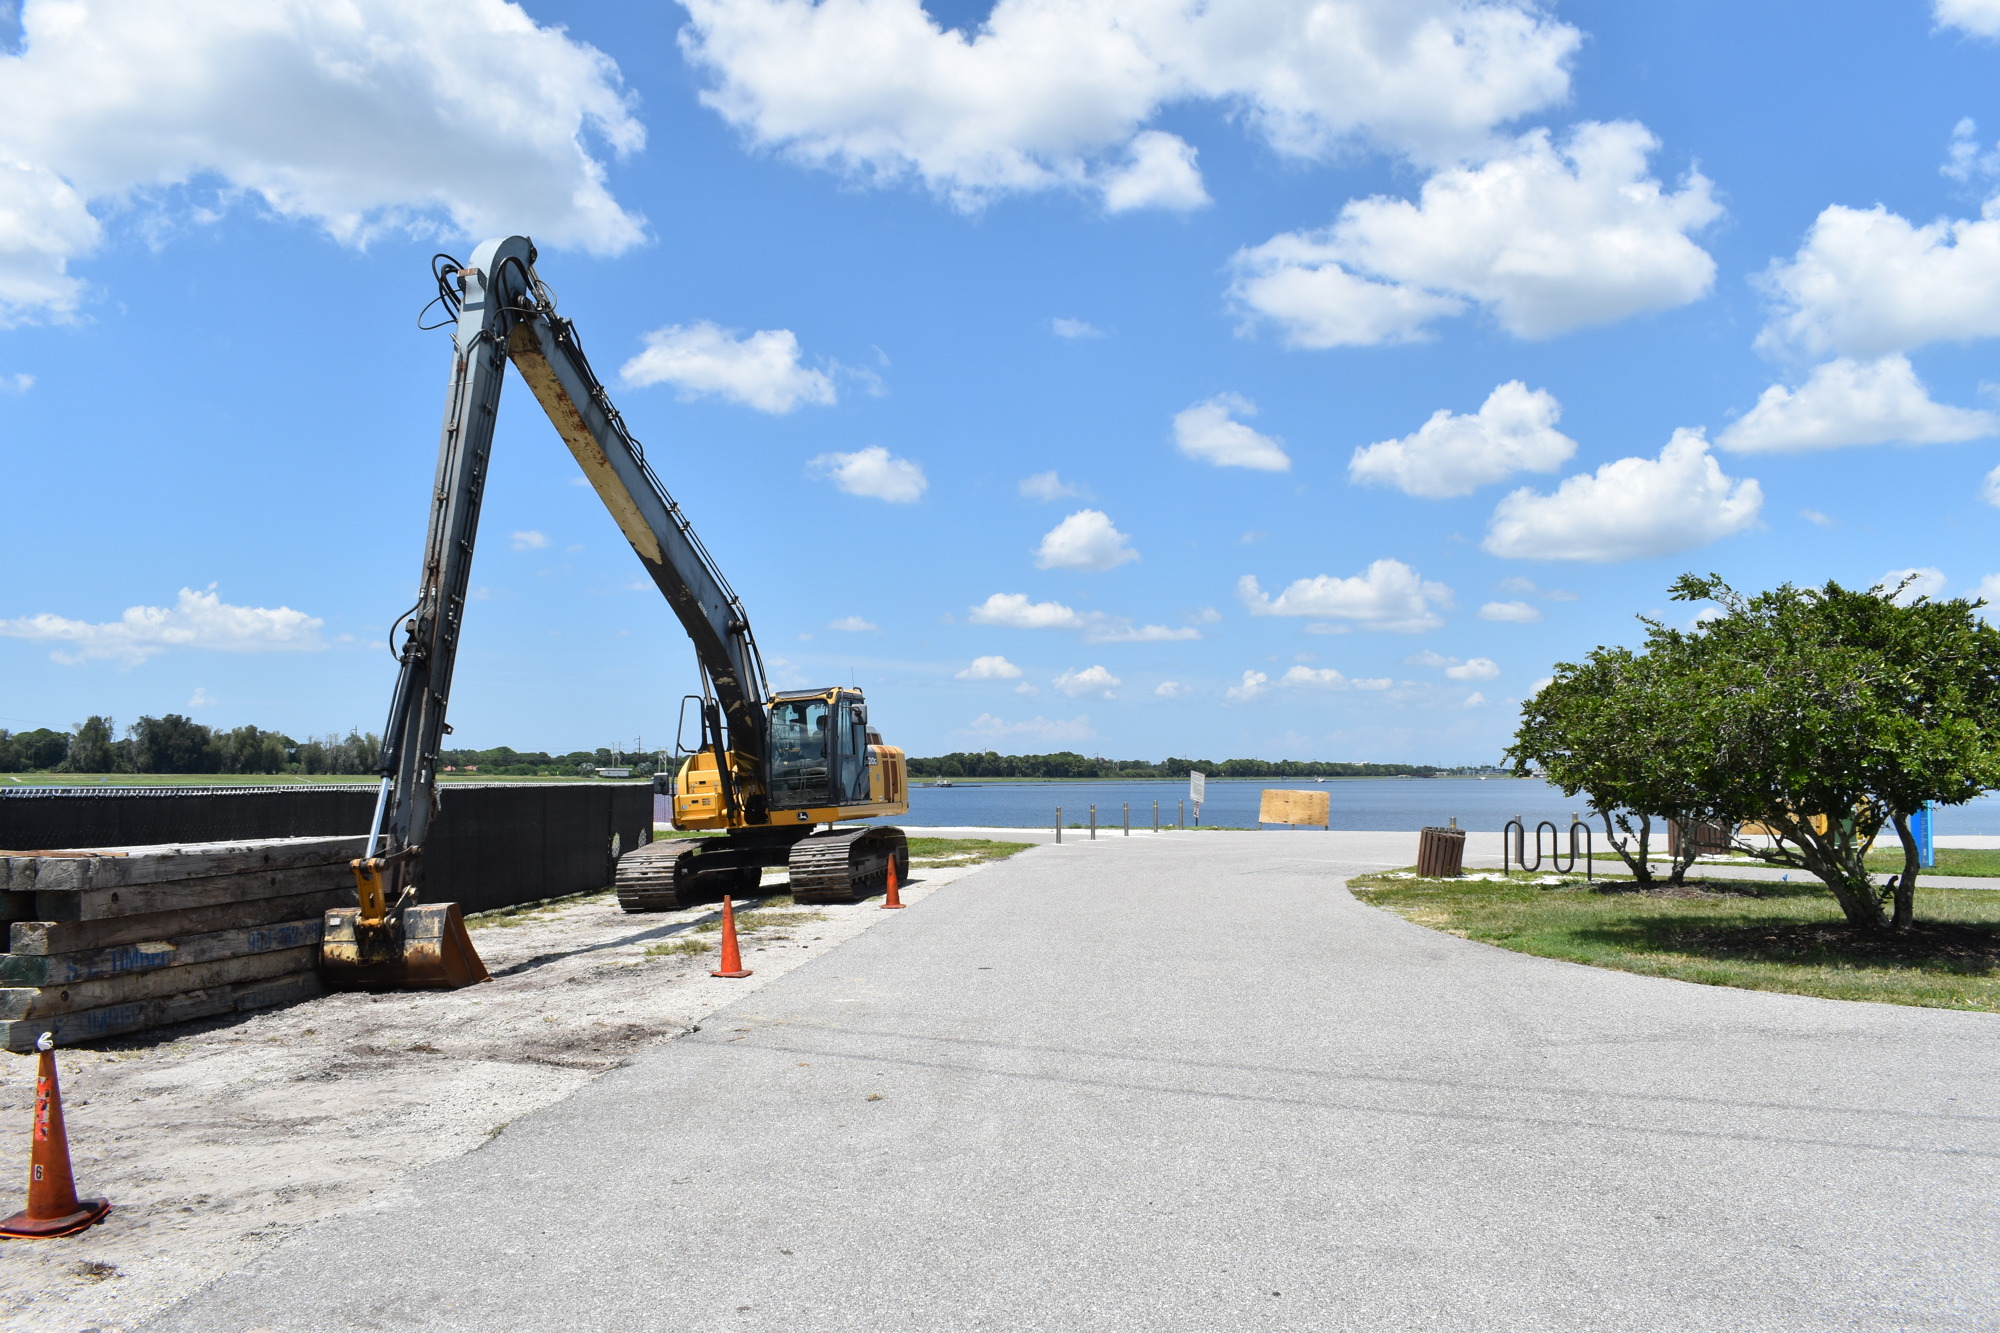 An excavator, which will be used to load riprap into the lake, stands beside the staging area next to the southeast parking lot. (Photo by Ian Swaby)